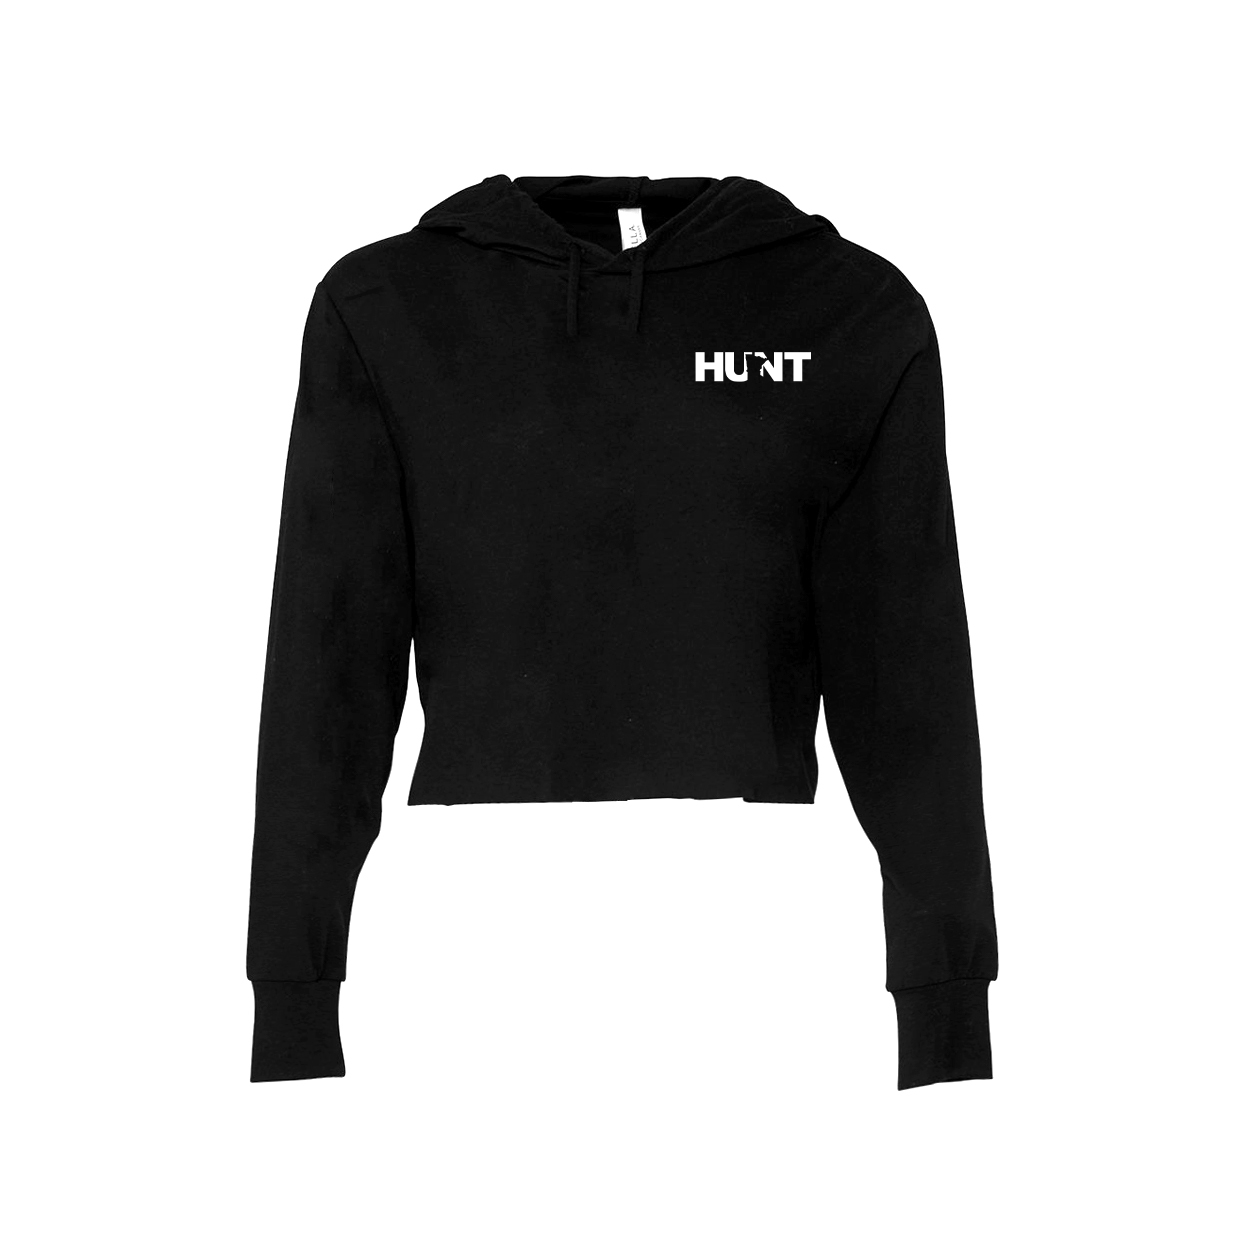 Hunt Minnesota Night Out Womens Long Sleeve Cropped Hooded Tee Black